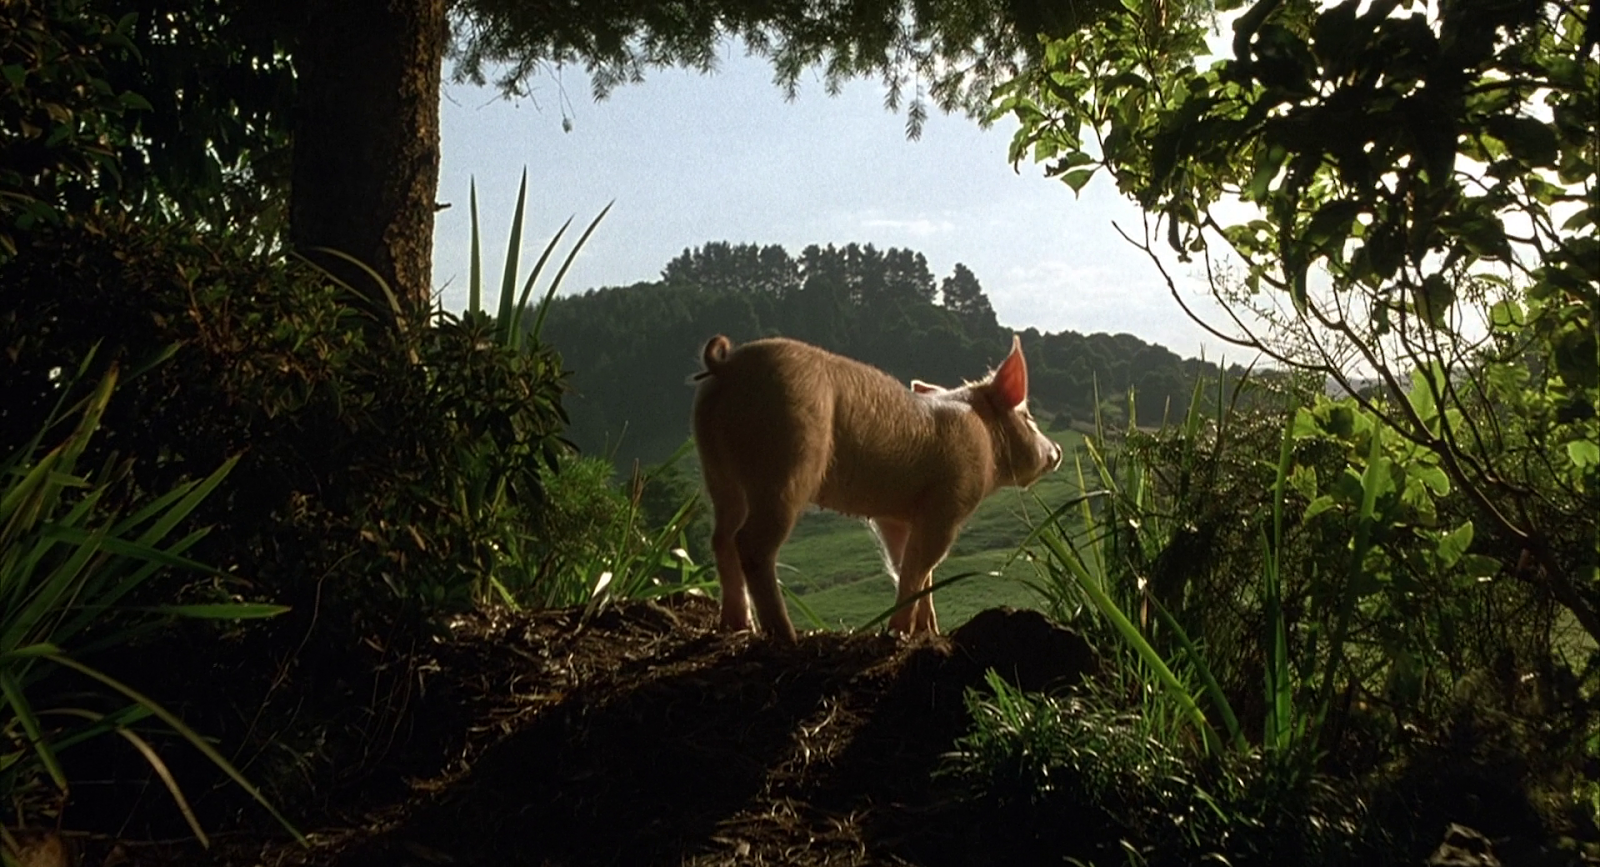 Babe the Gallant Pig (1995)